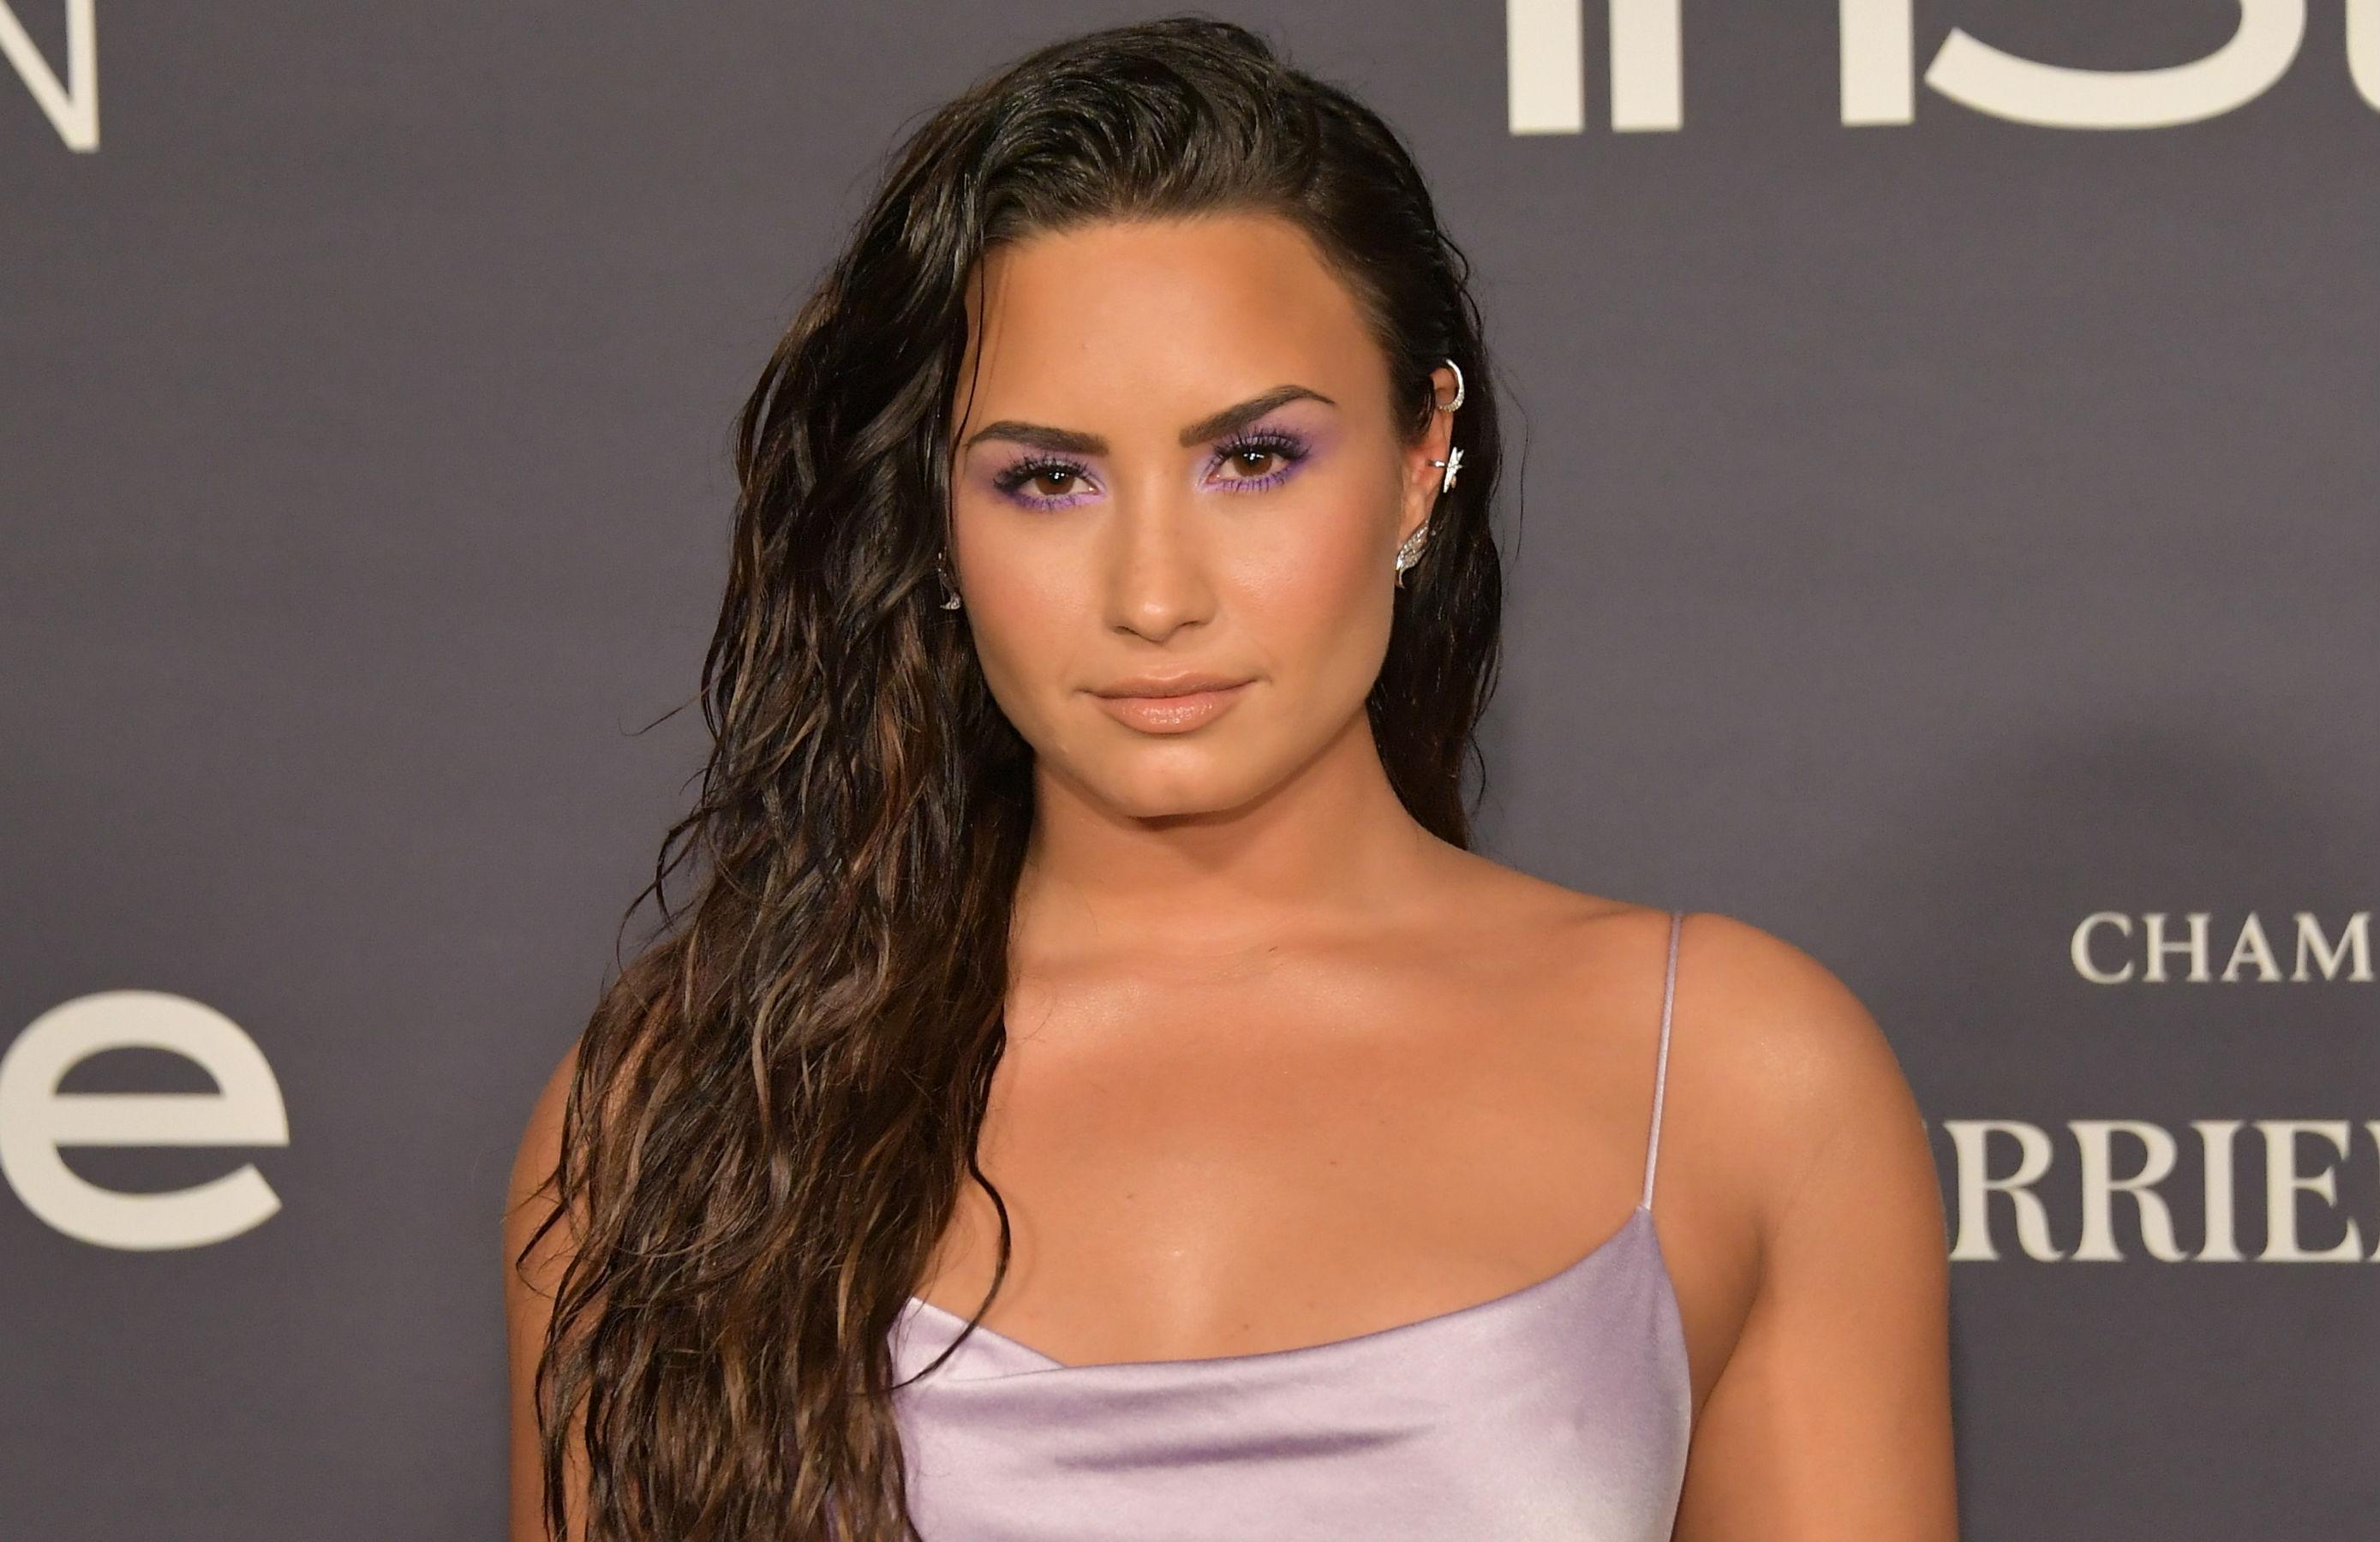 Demi Lovato shares makeup-free selfie, says 'accepting myself the way I am'